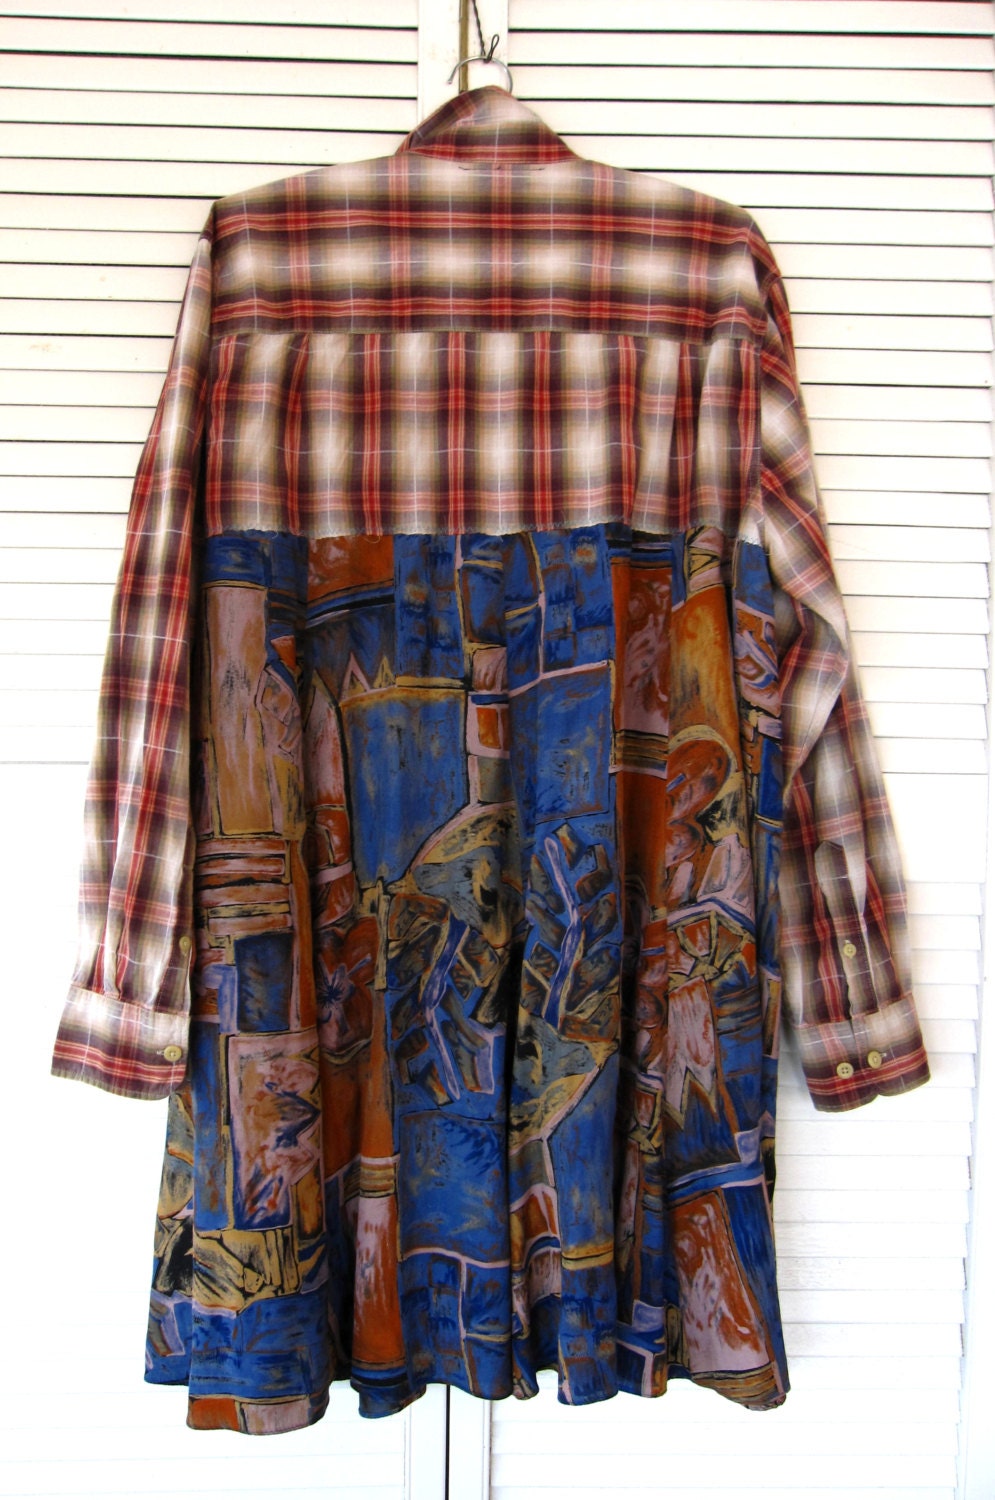 Romantic Patchwork dress upcycled clothing Eco Tattered top up